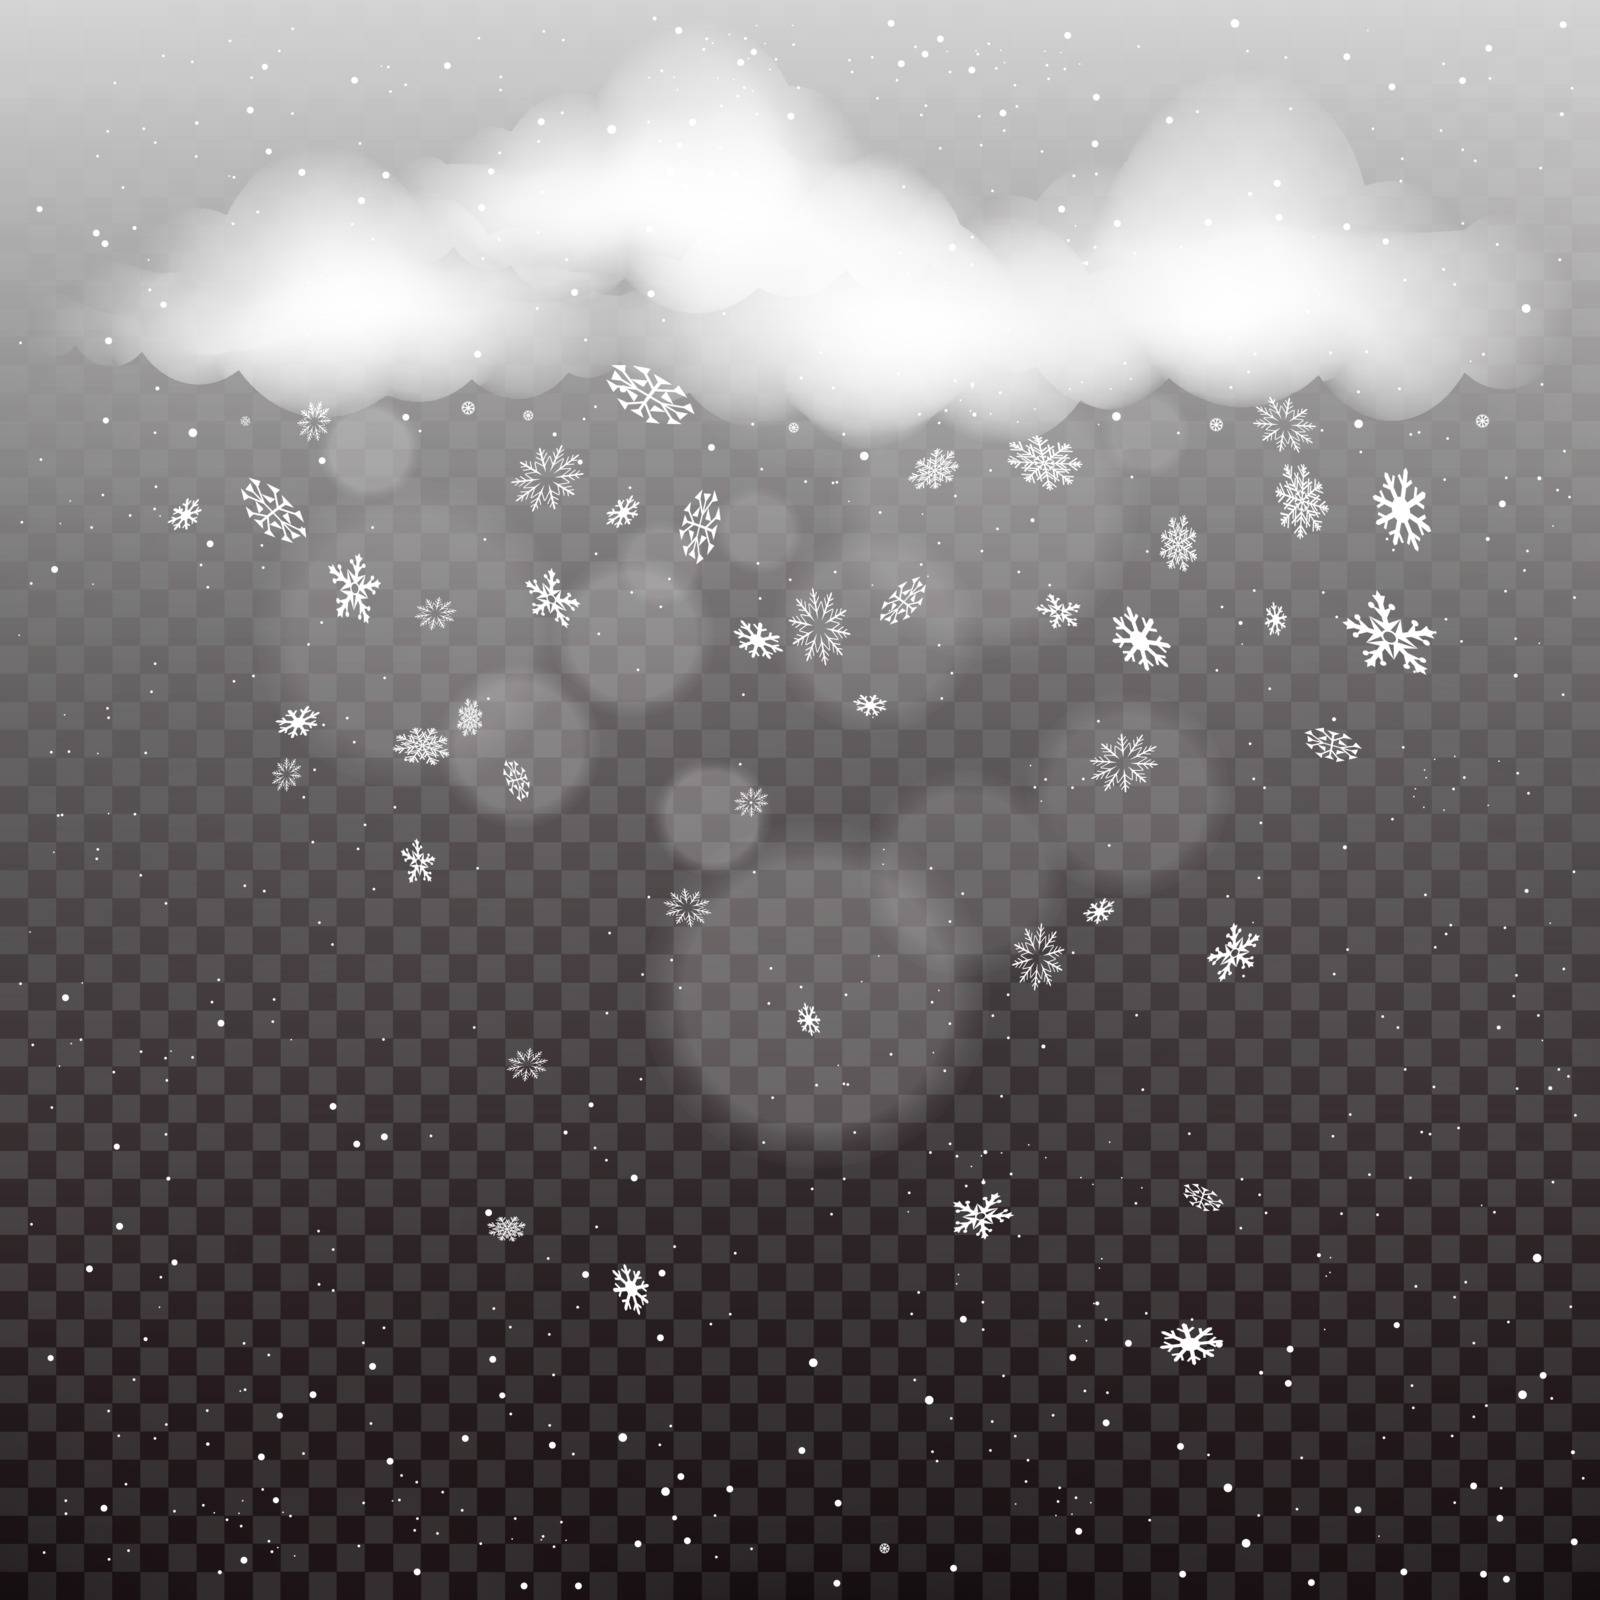 Clouds with snowfall template dark background by romvo